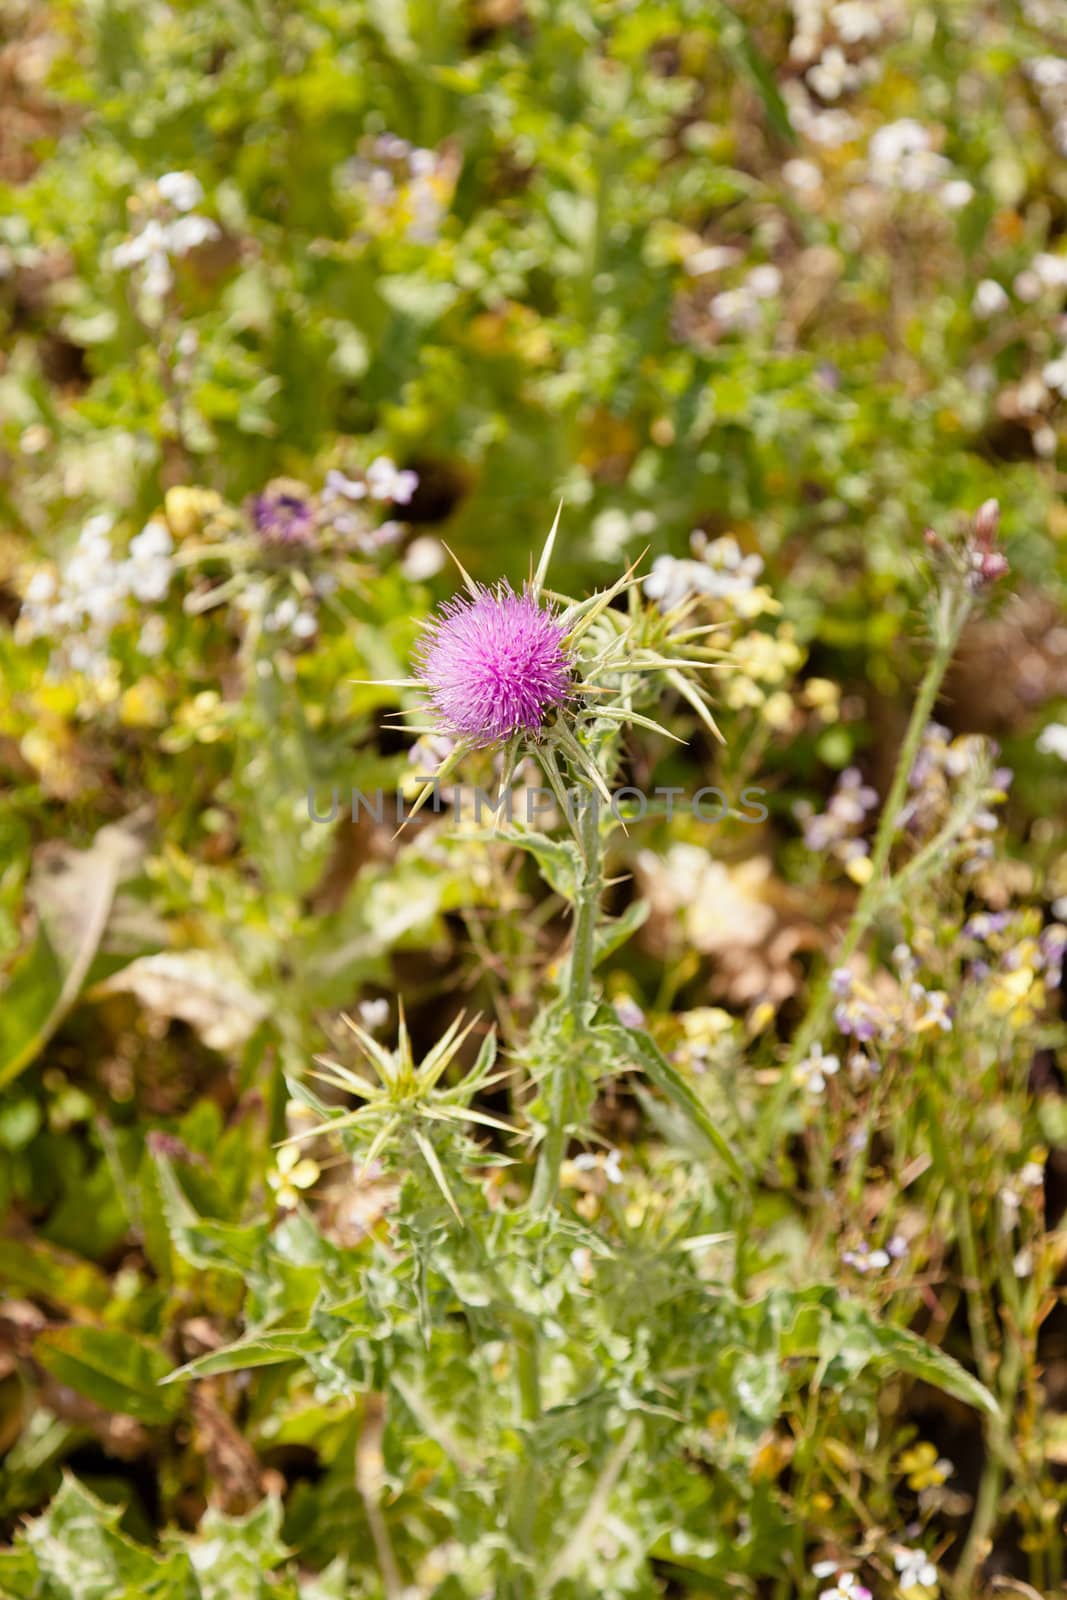 Cirsium occidentale, with the common name Cobwebby thistle, is a species of thistle native throughout California deserts, mountains, and valleys